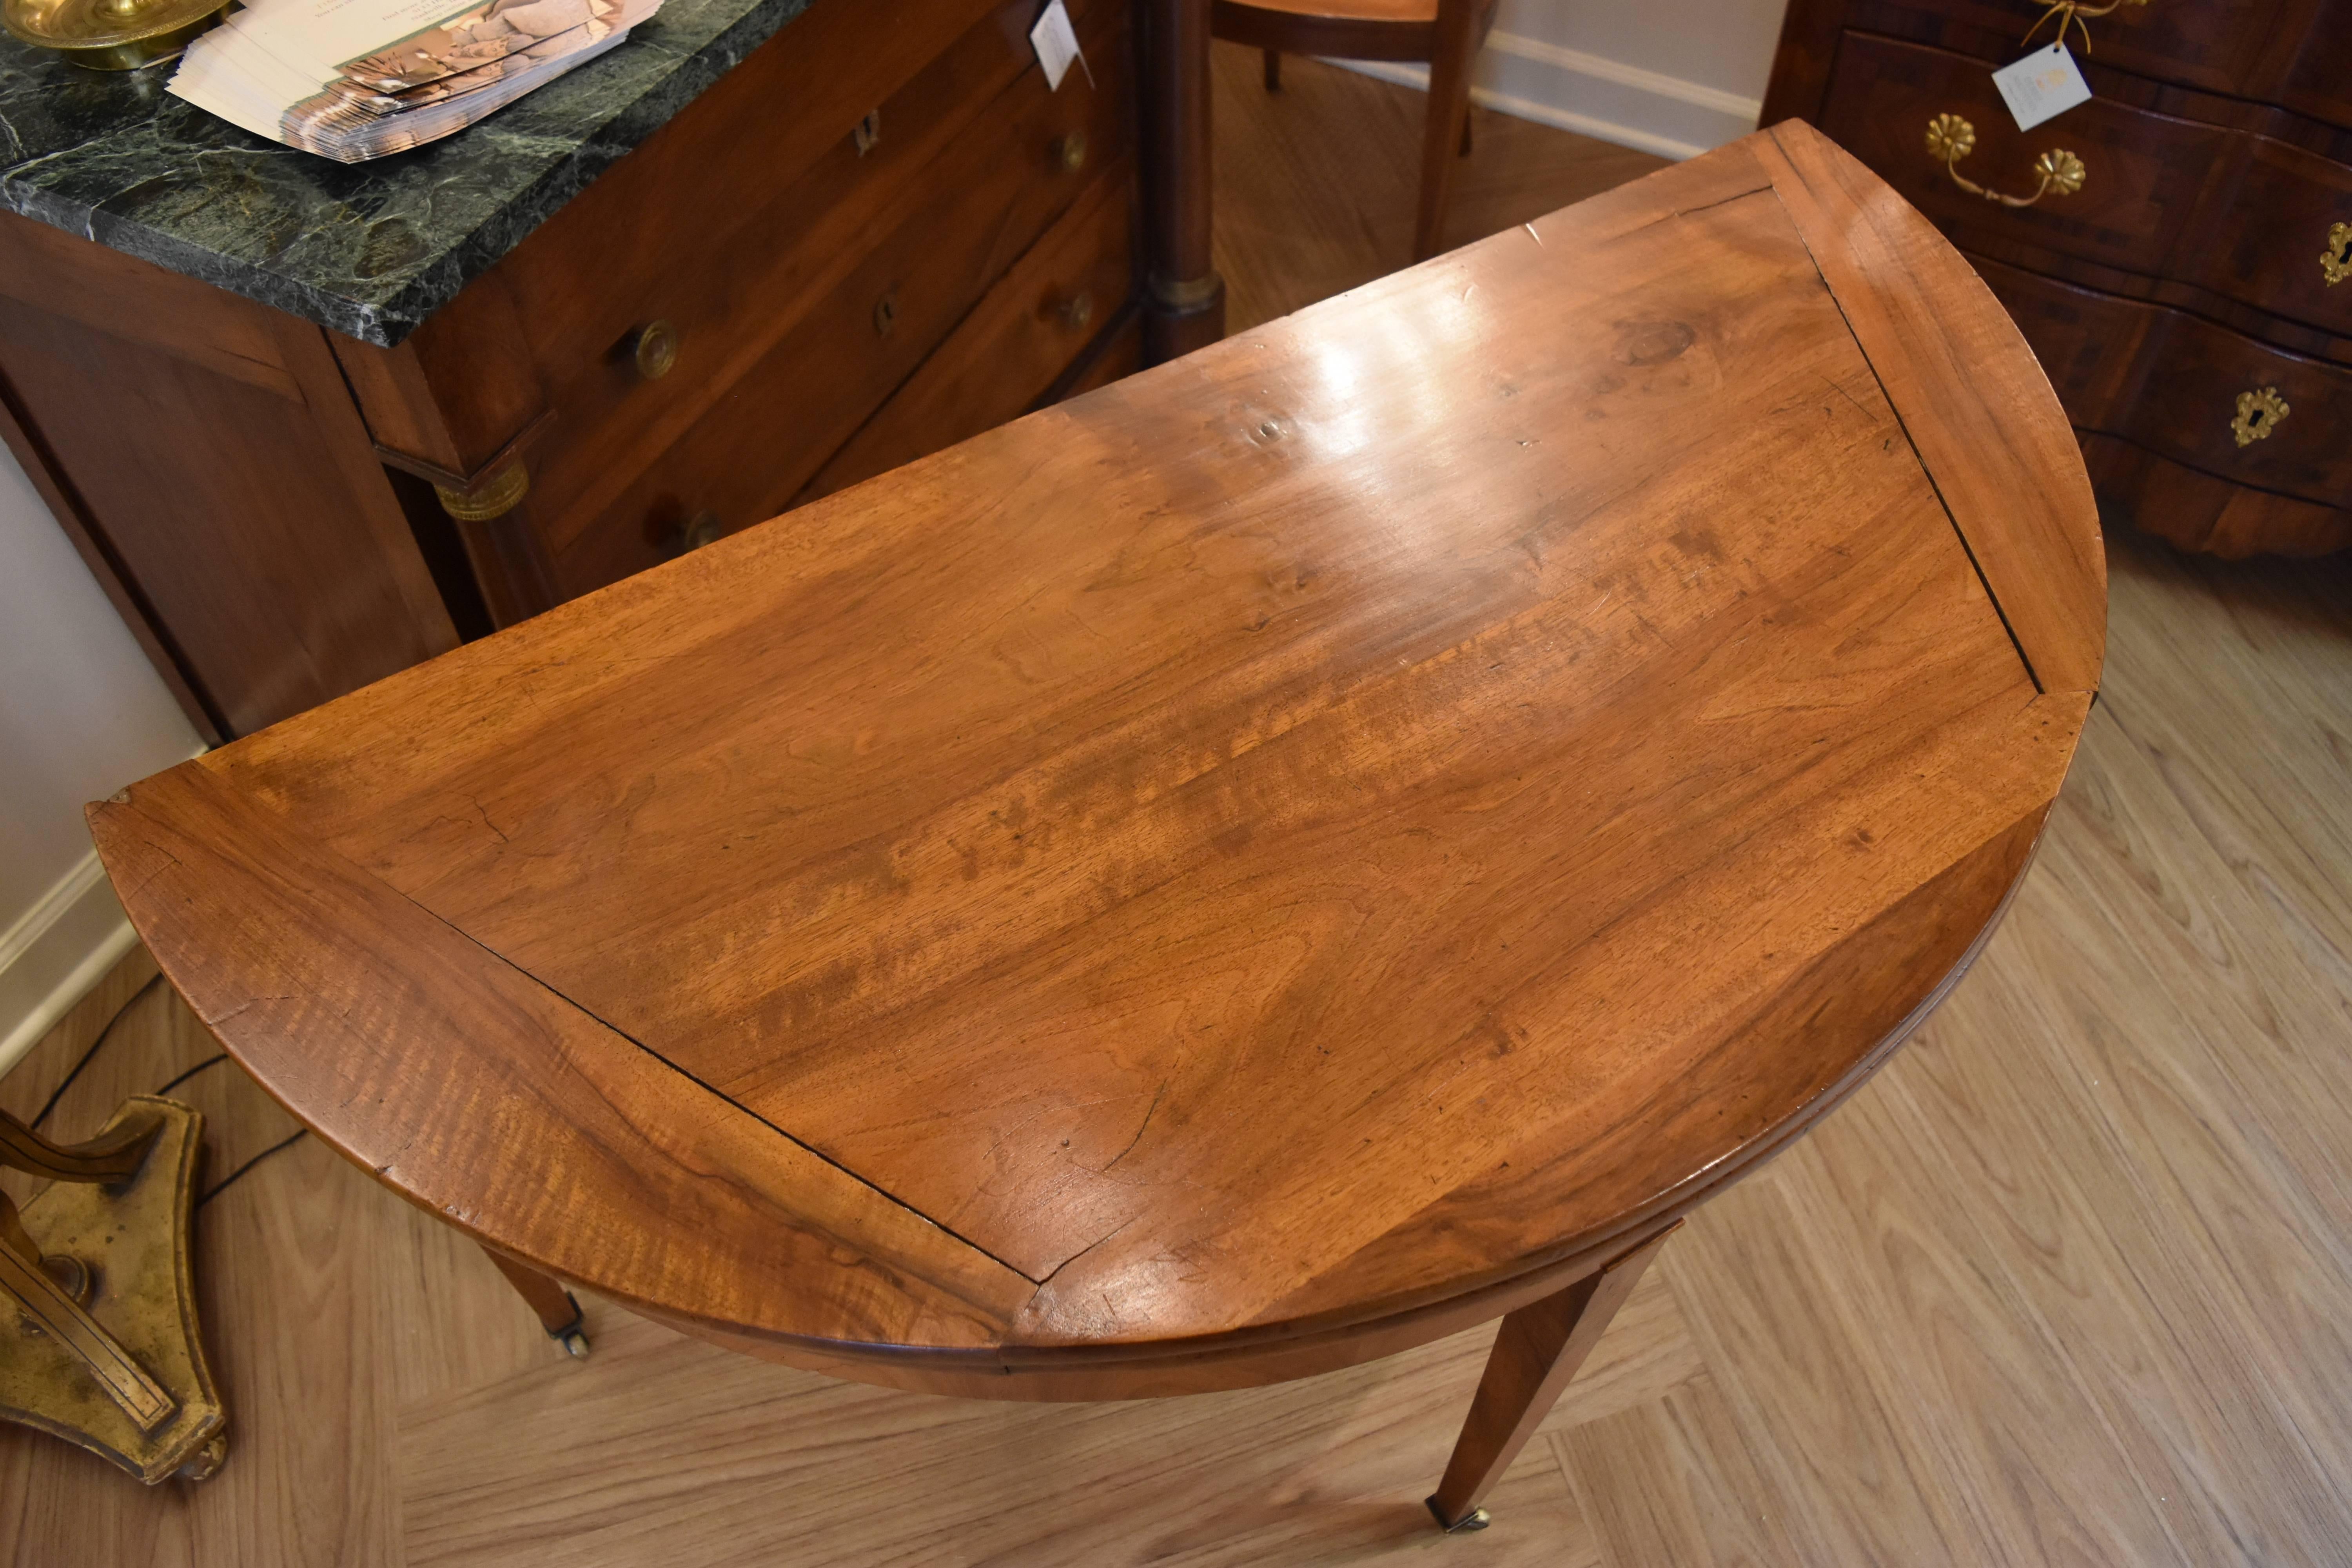 This 19th Century French Walnut Demilune is in excellent condition and features an interesting geometric wood design on its' top and lovely tapered legs on casters.  It can be used as a round dining table or closed as a side table.

24 inches deep